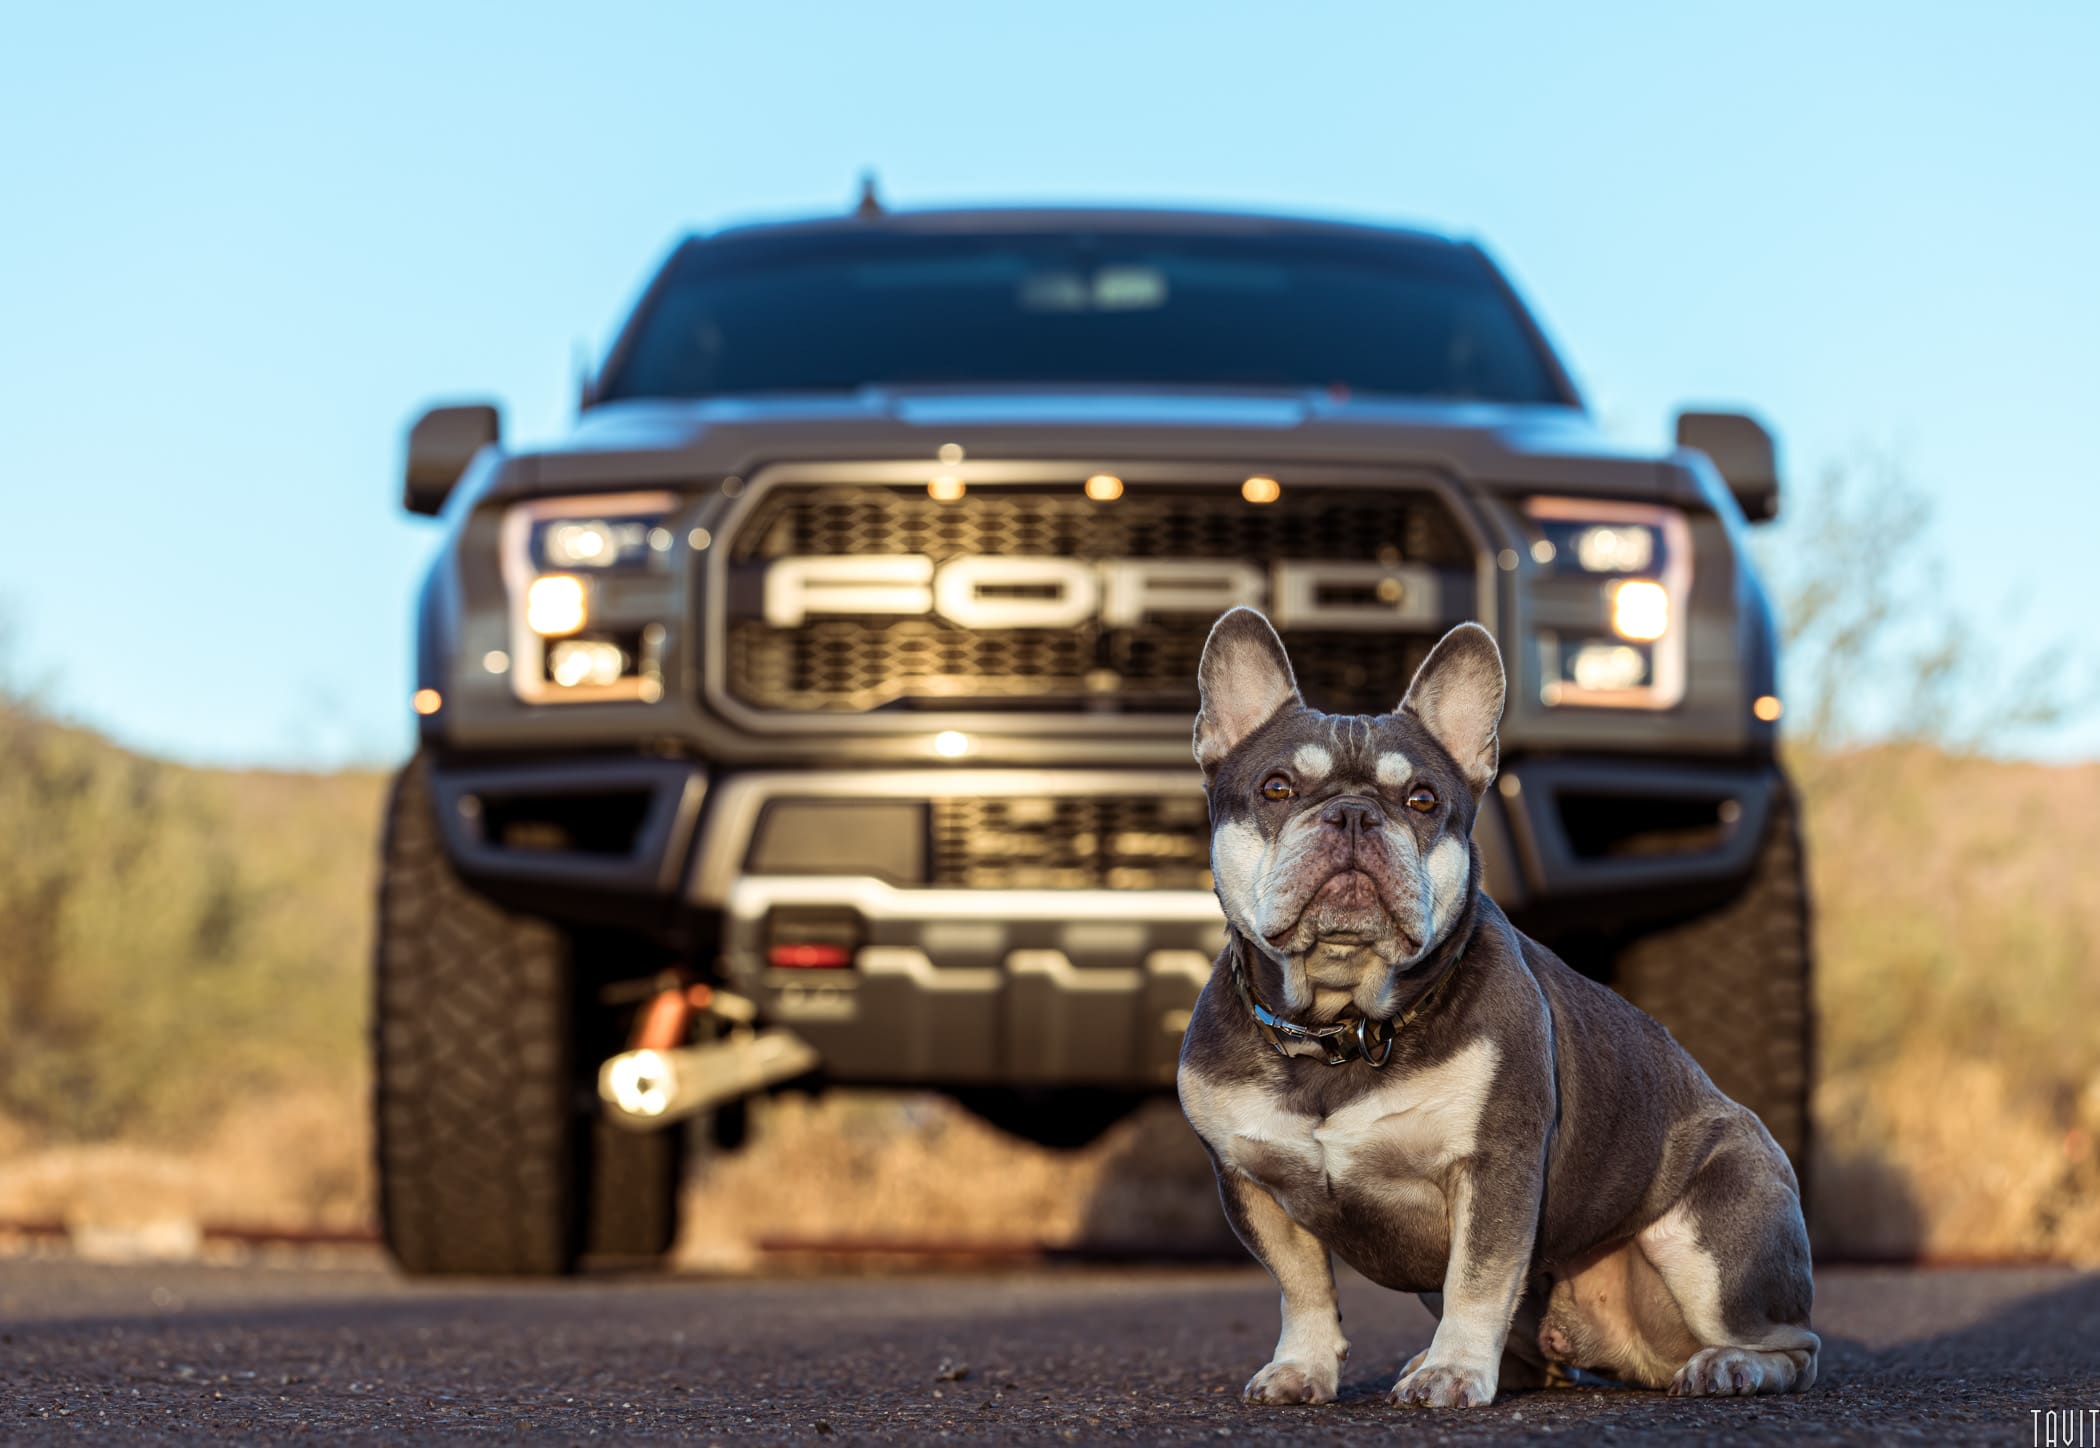 Dog in front of Ford Raptor truck in background